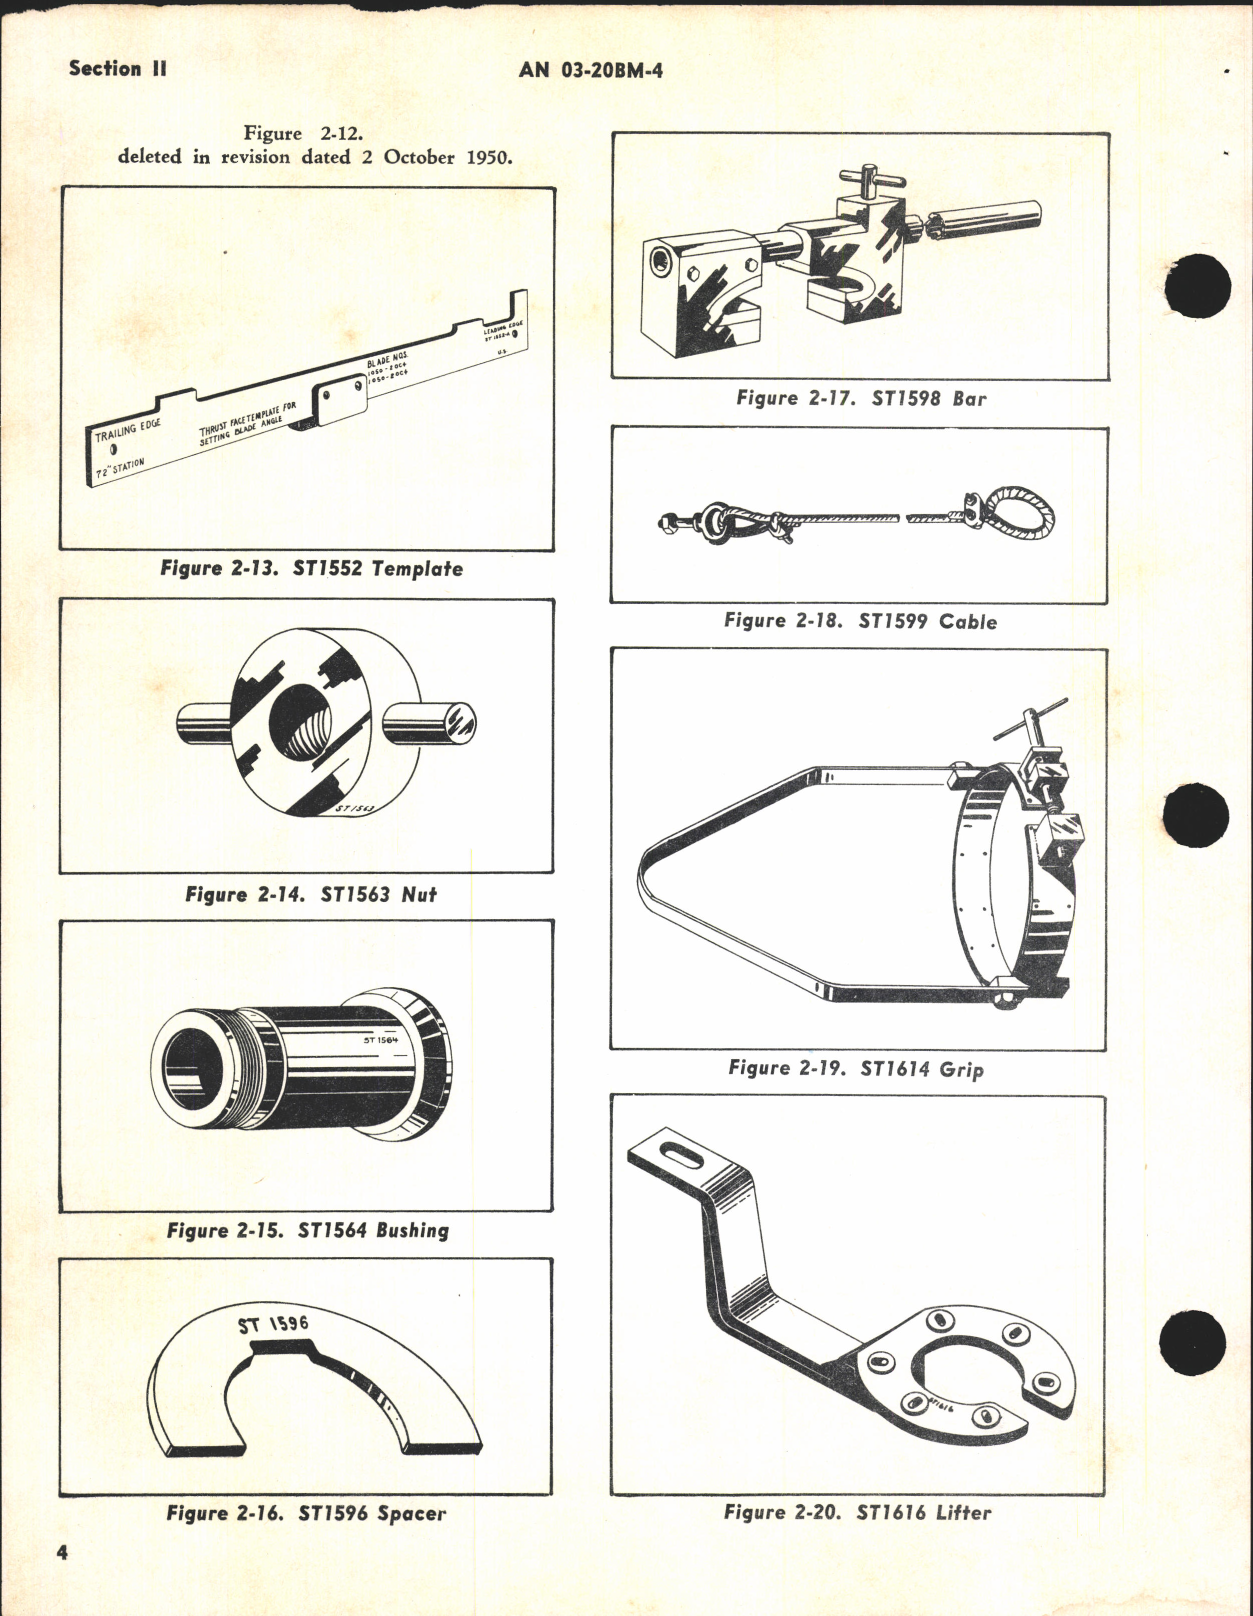 Sample page 8 from AirCorps Library document: Overhaul Instructions for Electric Propeller Models C634S-C314 and C634S-C402